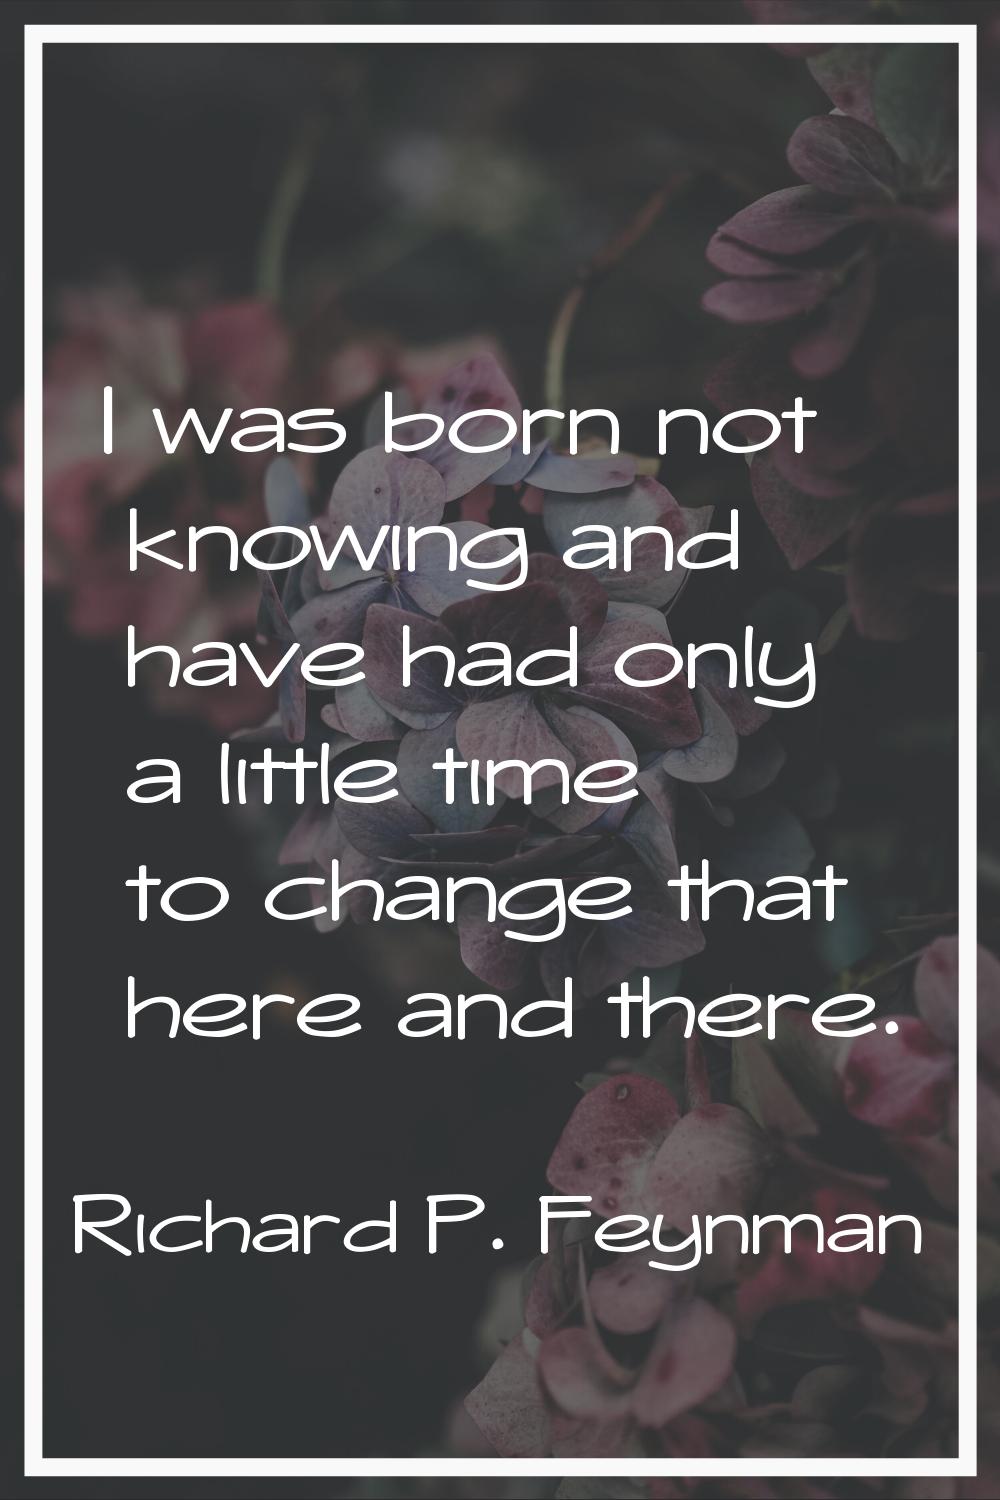 I was born not knowing and have had only a little time to change that here and there.